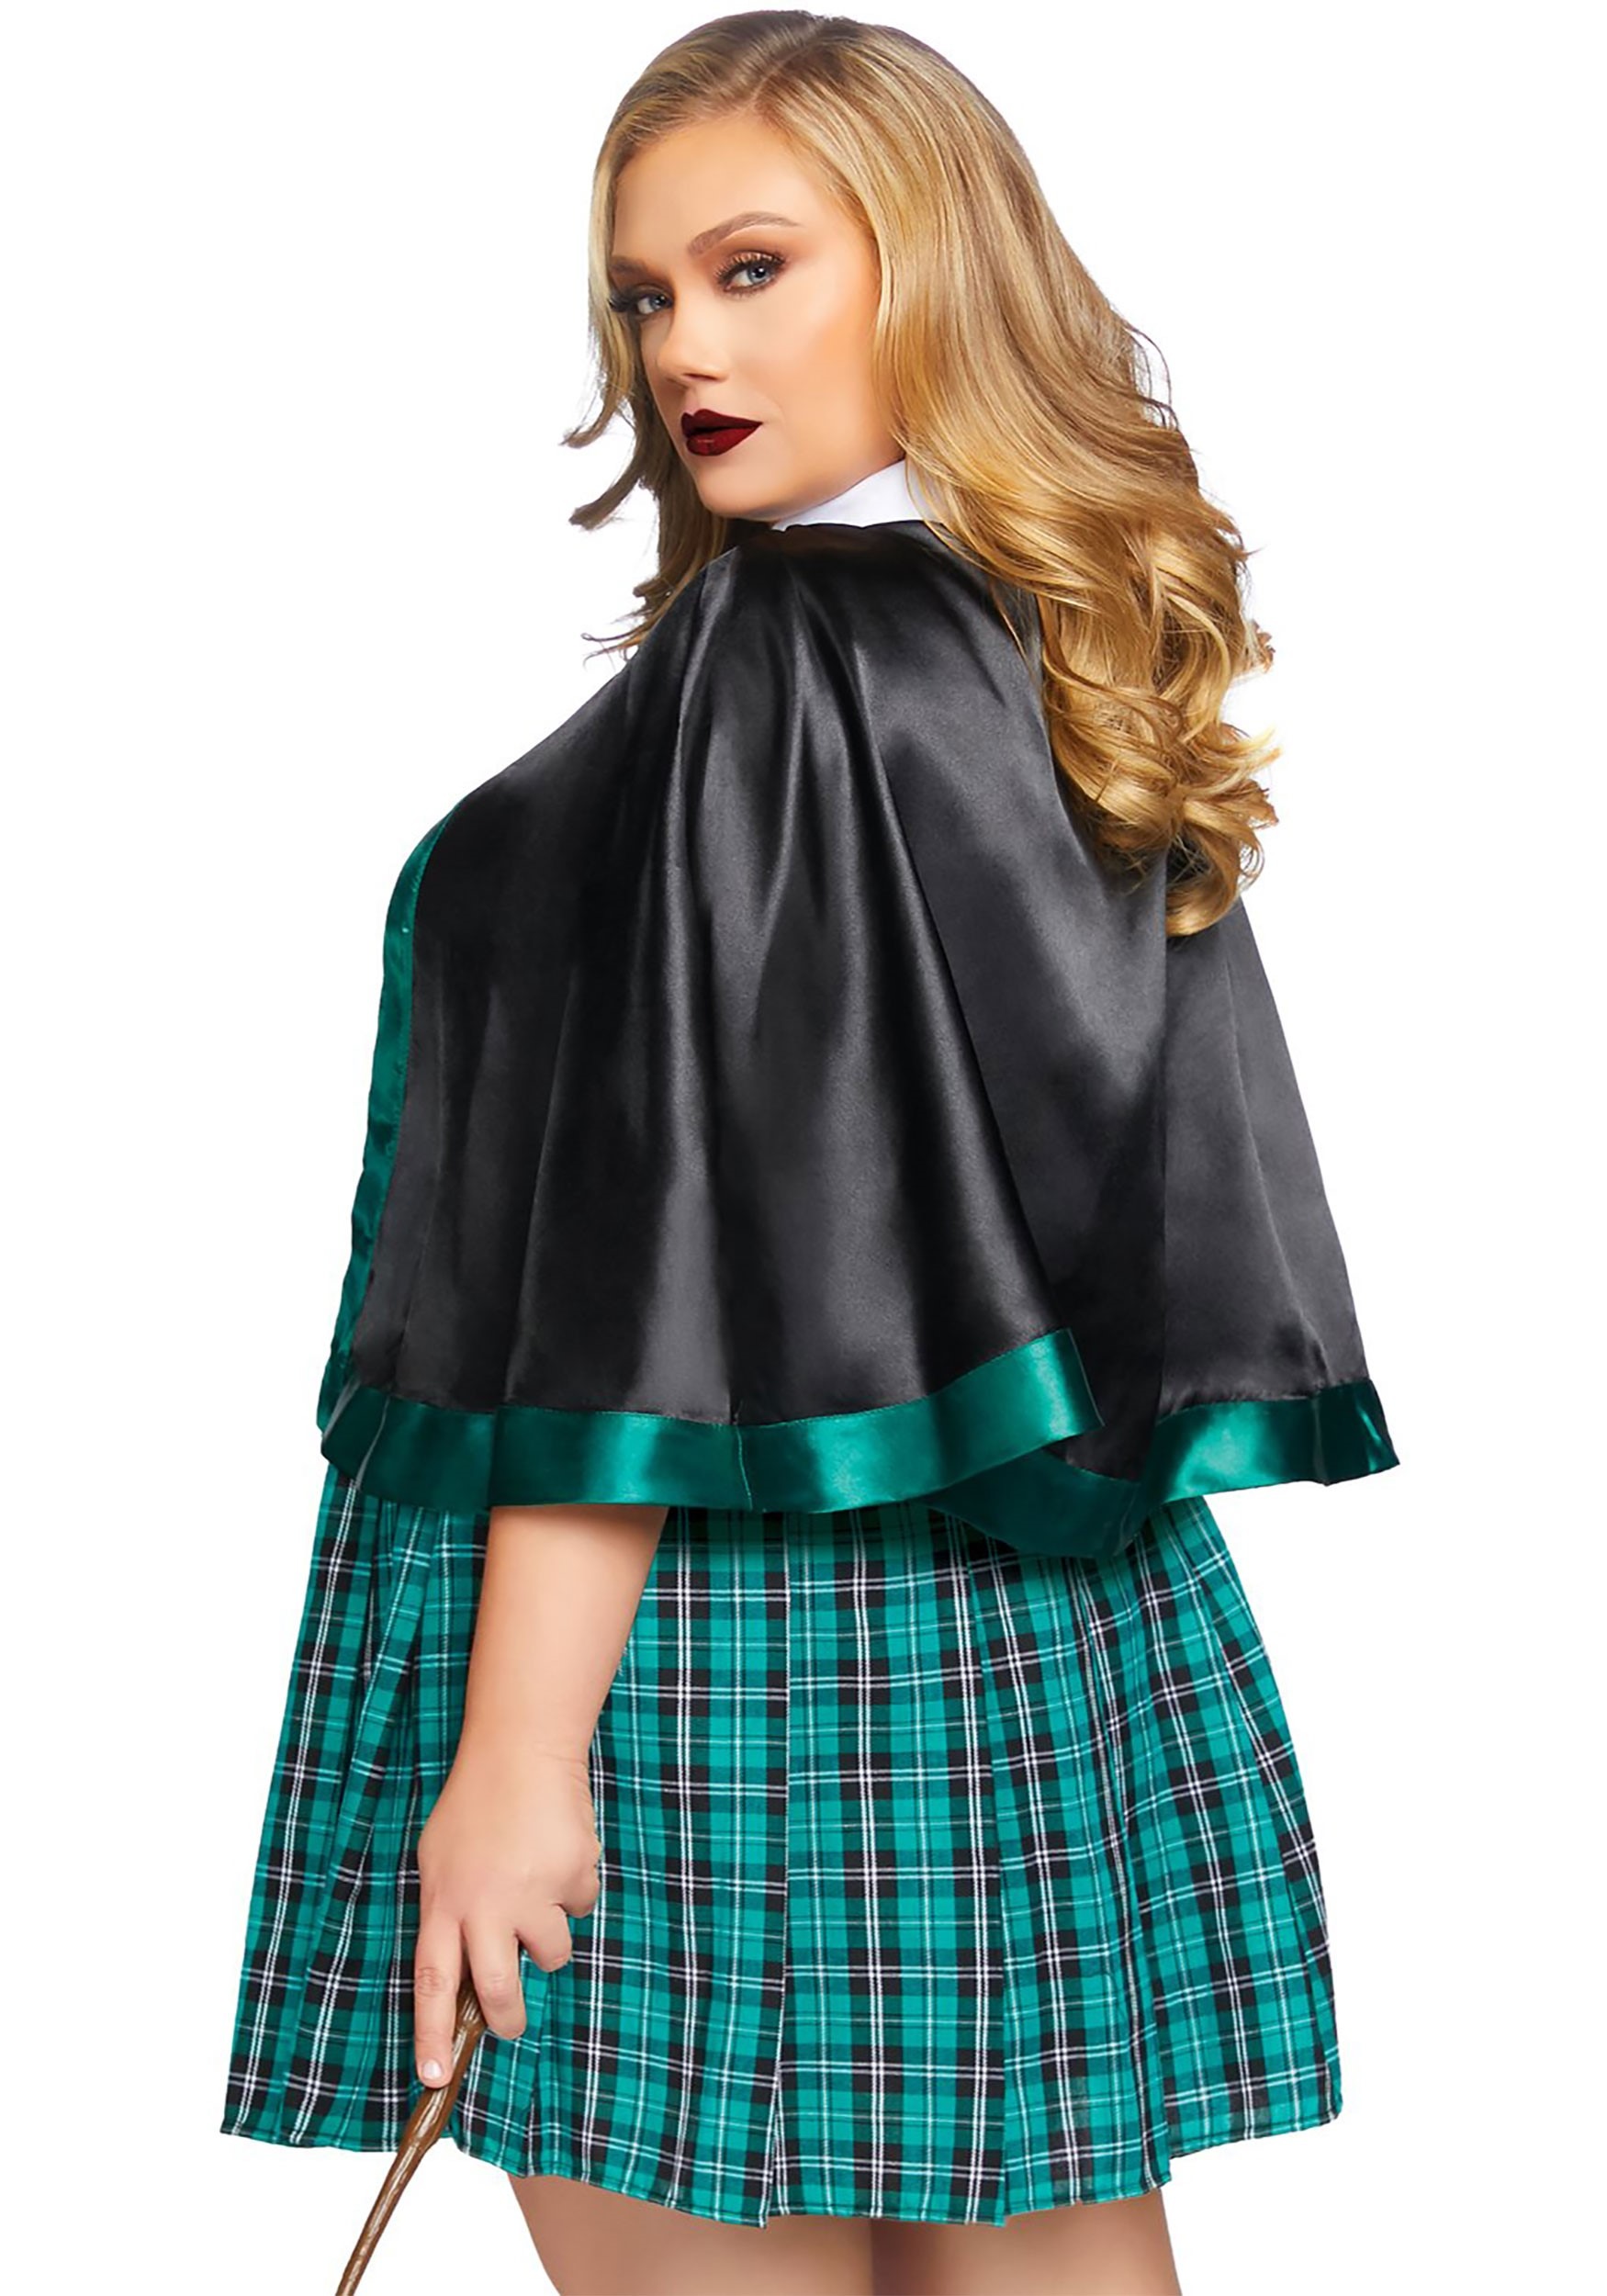 Sinister Spellcaster Adult's Plus Size Costume